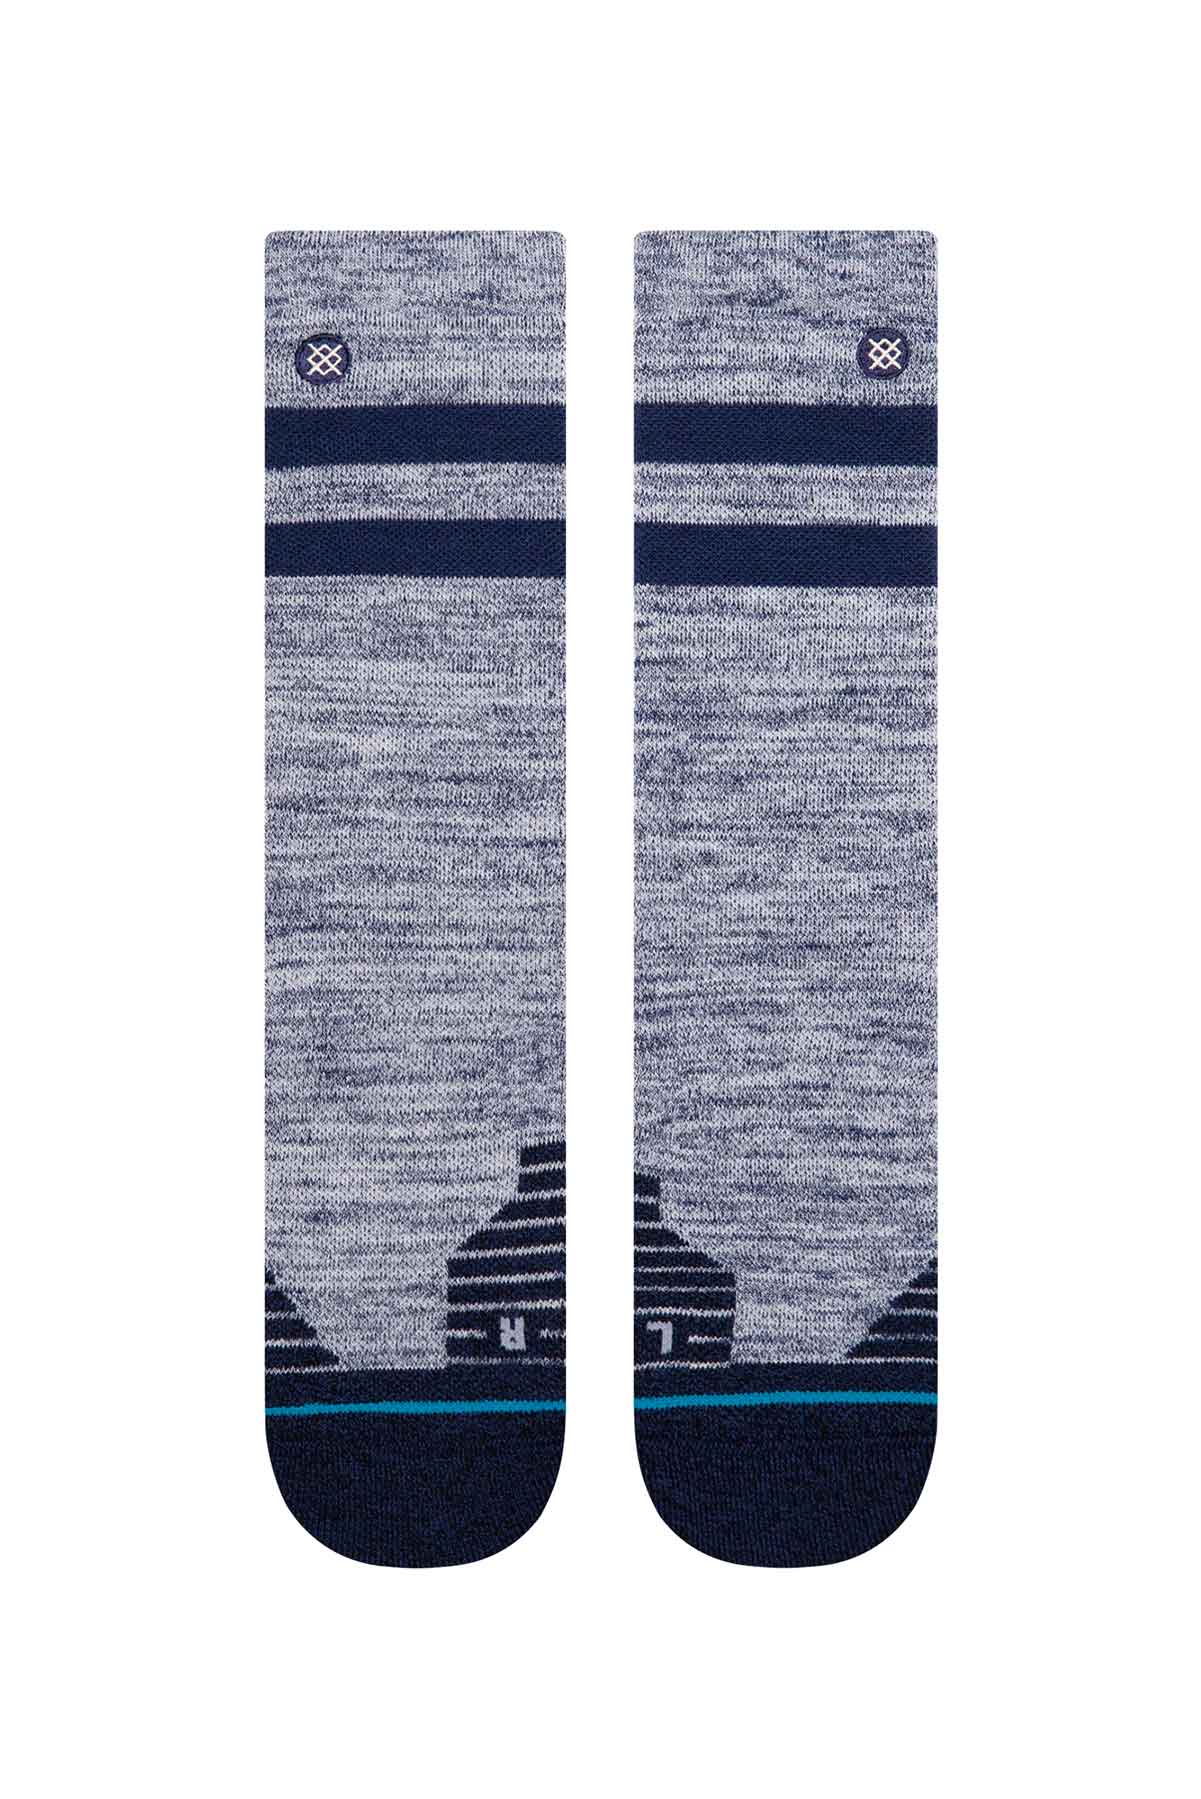 Stance - Campers - Navy - Front